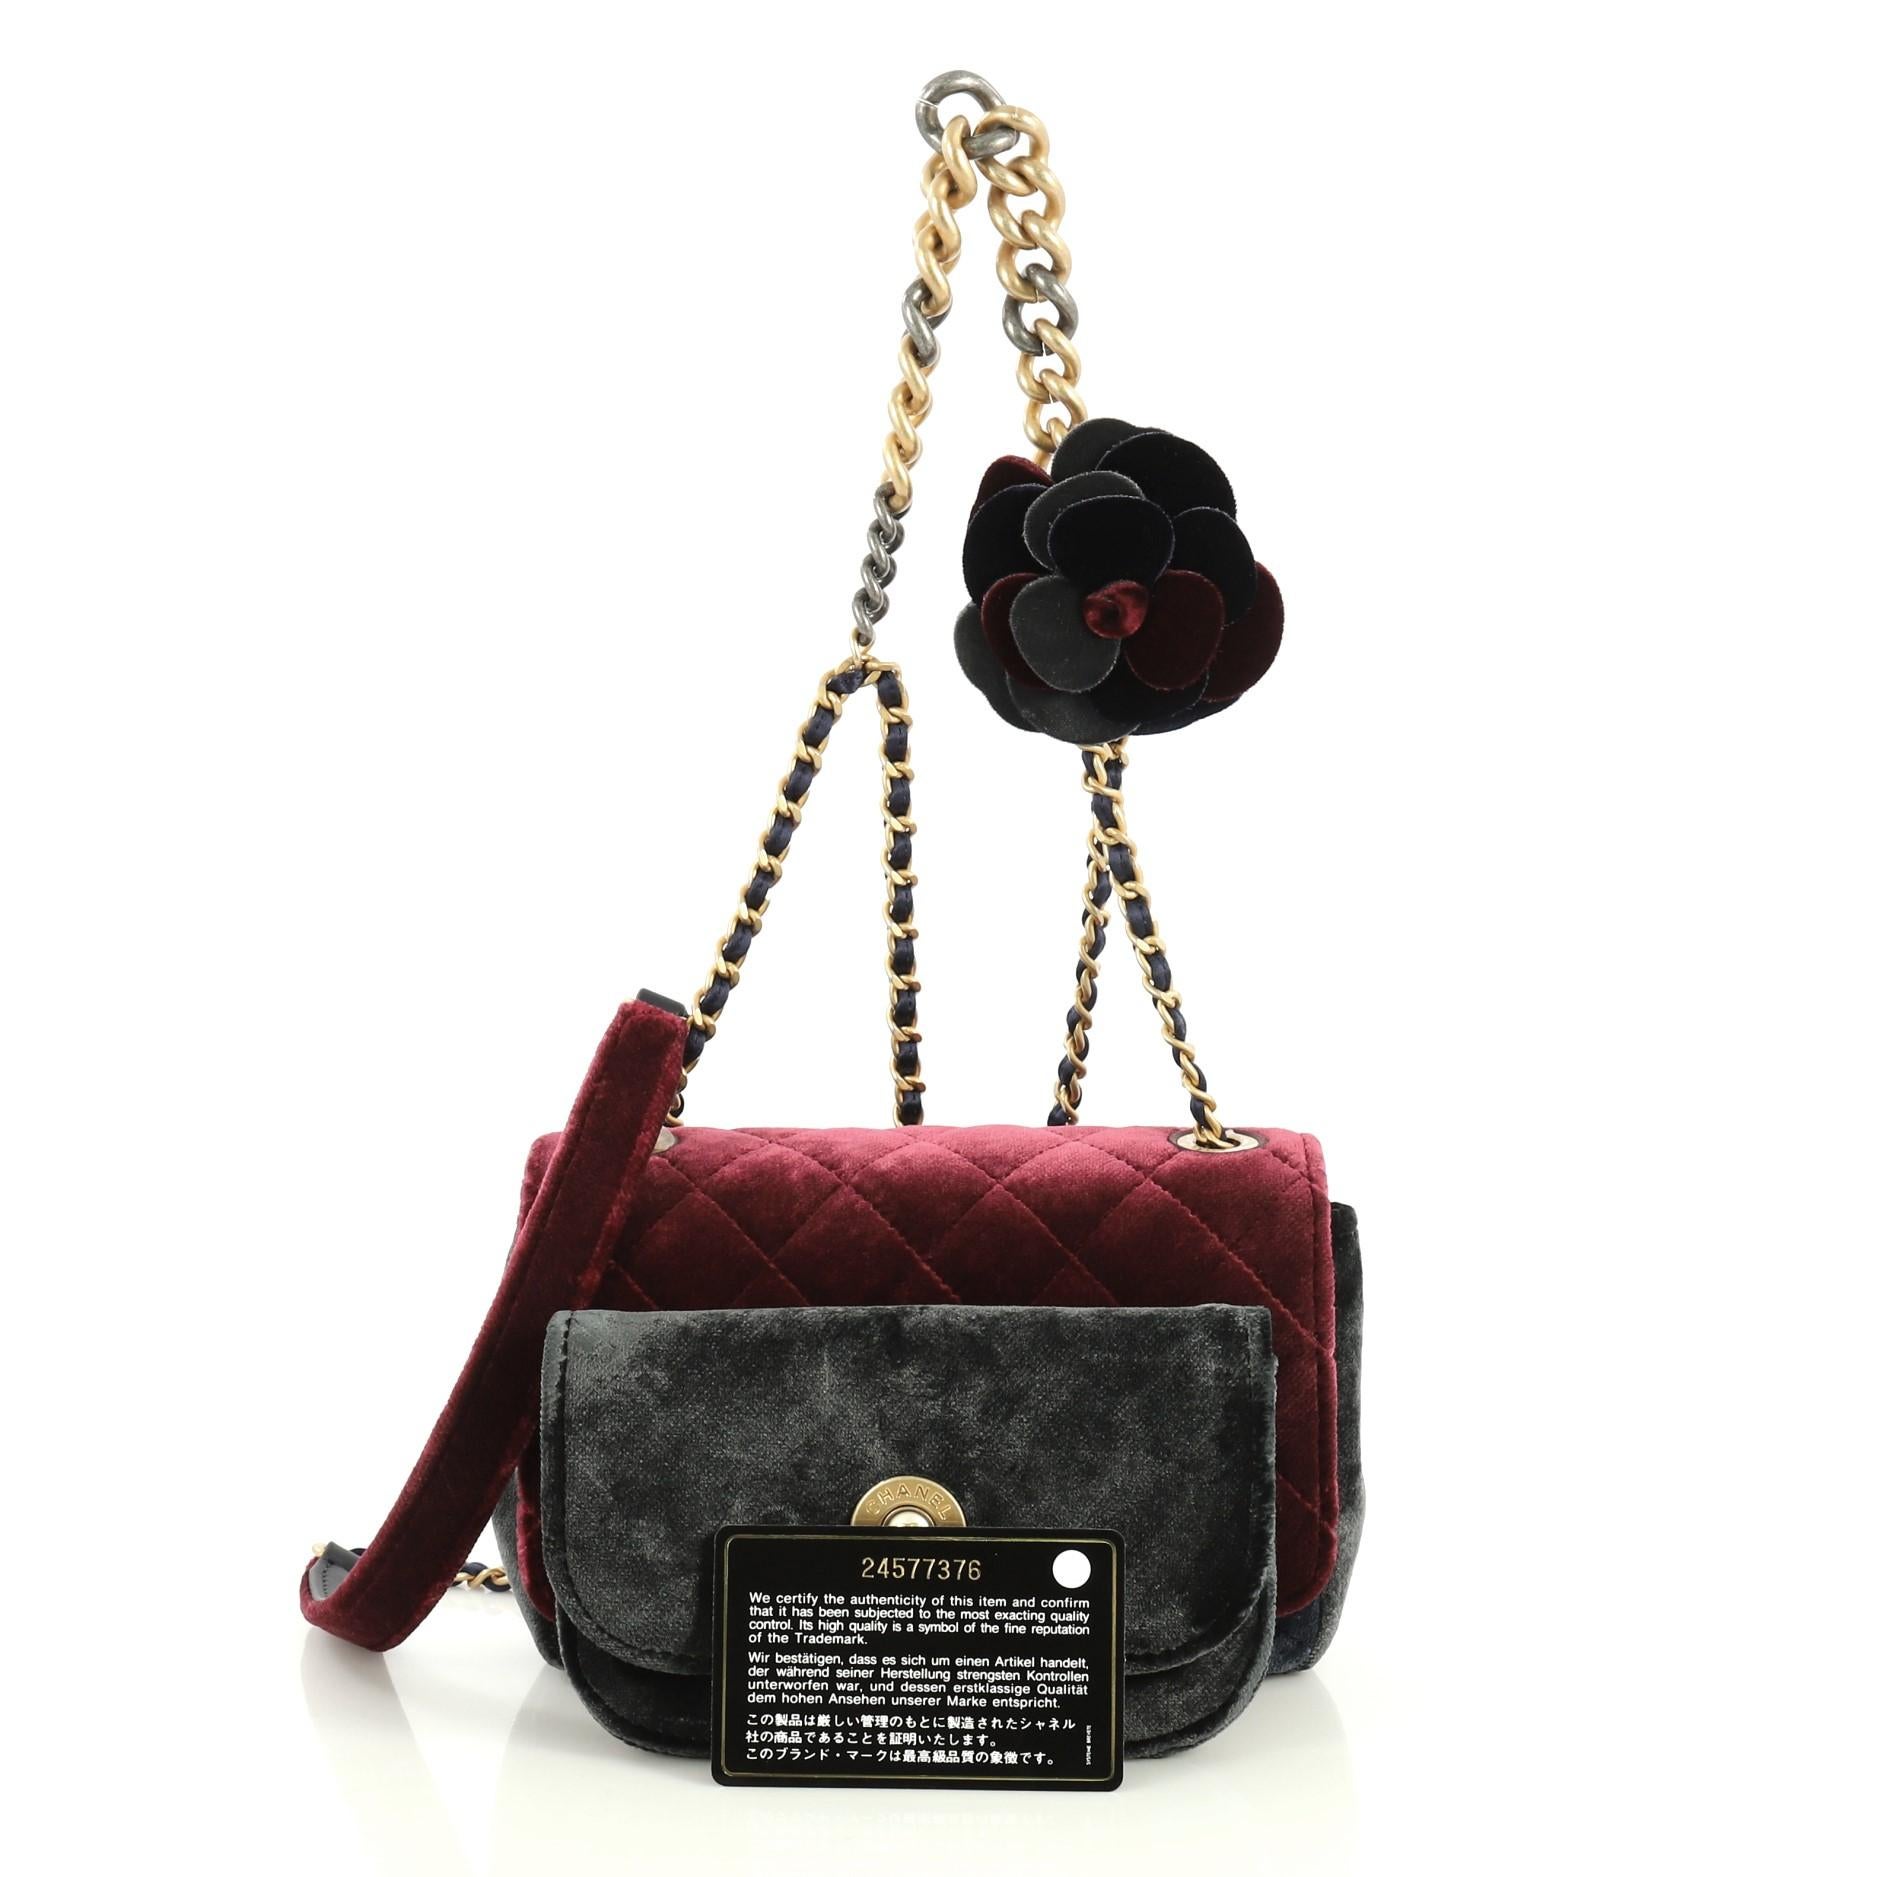 This Chanel Private Affair Camellia Flap Bag Quilted Velvet Small, crafted from multicolor quilted velvet, features a chain-link handle, woven-in satin chain link strap and matte gold-tone hardware. Its CC turn-lock closure opens to a red satin